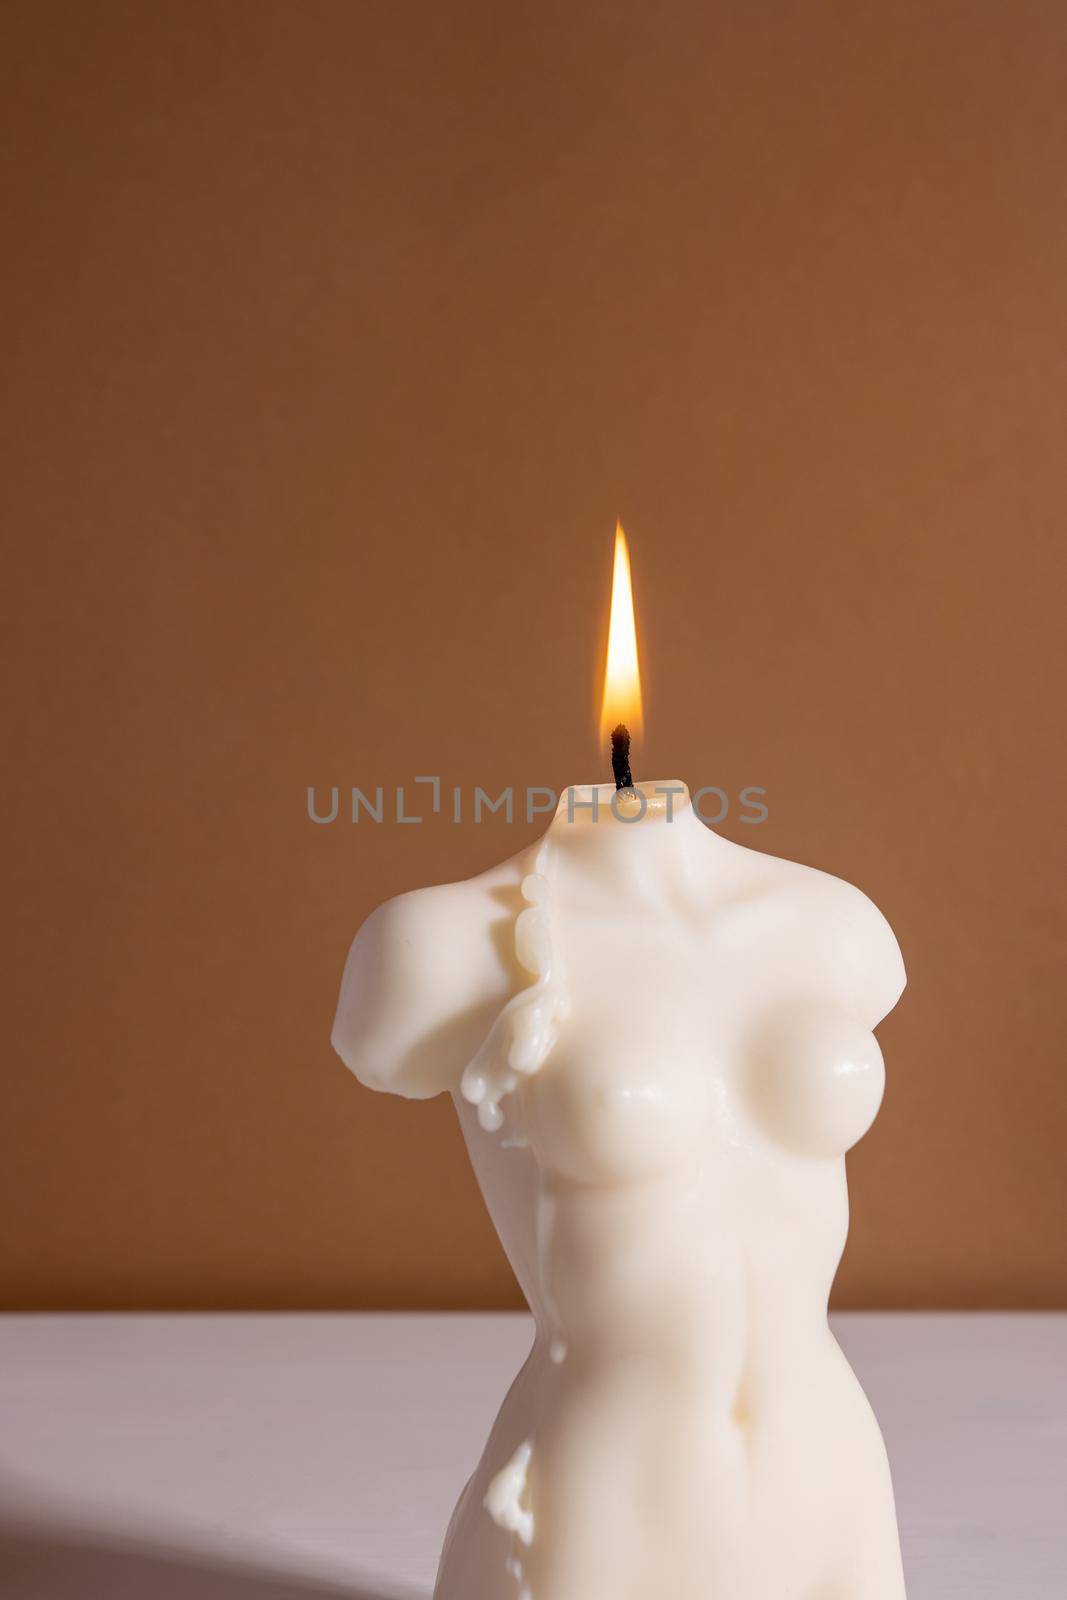 Candle in woman torso shape in brown interior with stone and dried flowers, autumn atmosphere vertical